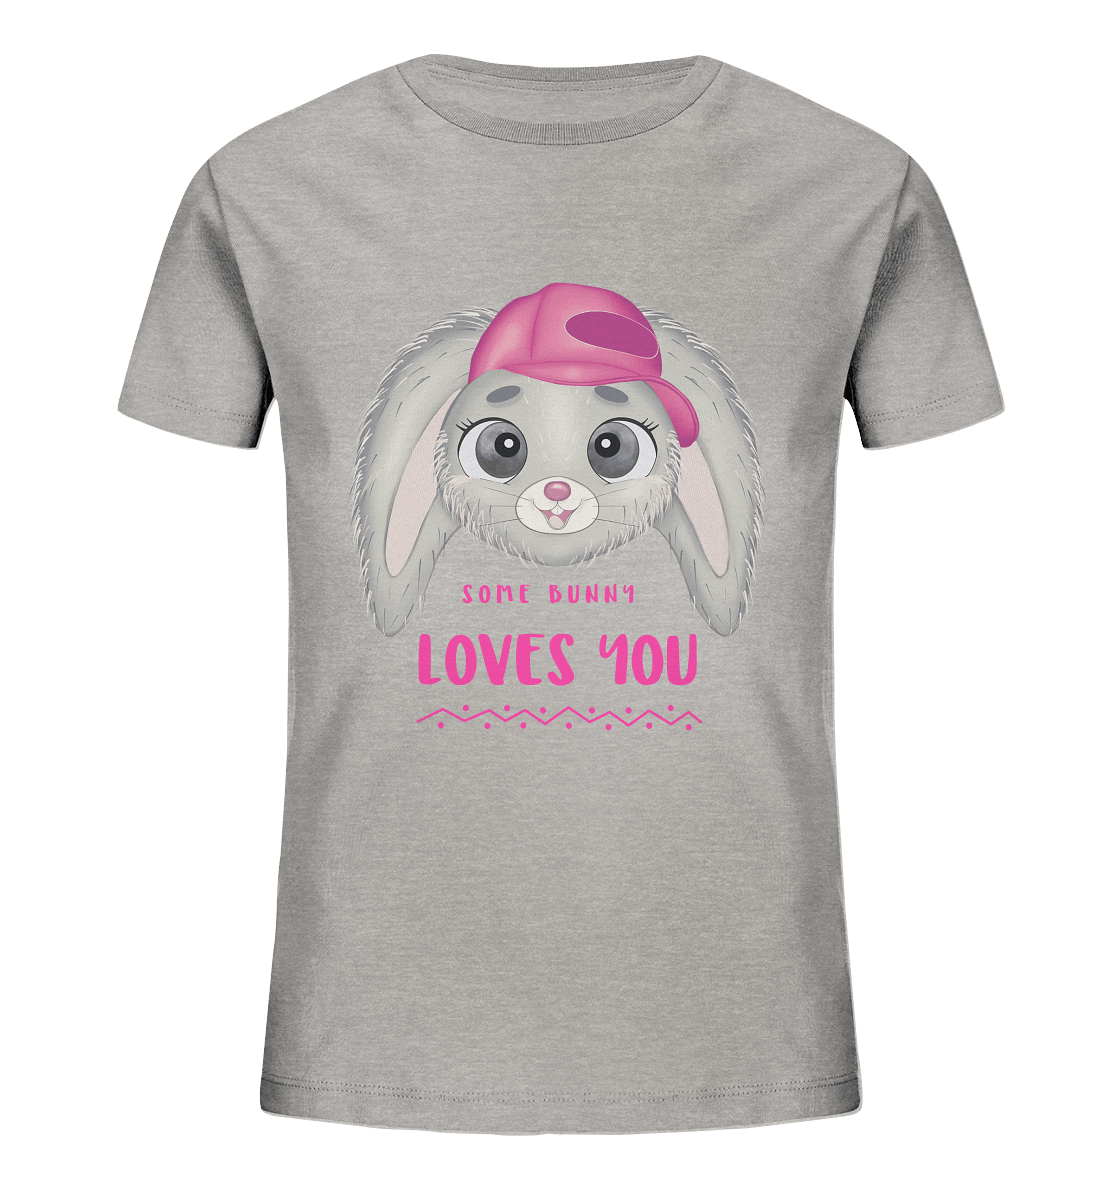 Süßes Cartoon Hase T-Shirt Some Bunny loves you Kinder T-Shirt in grau von Bloominic